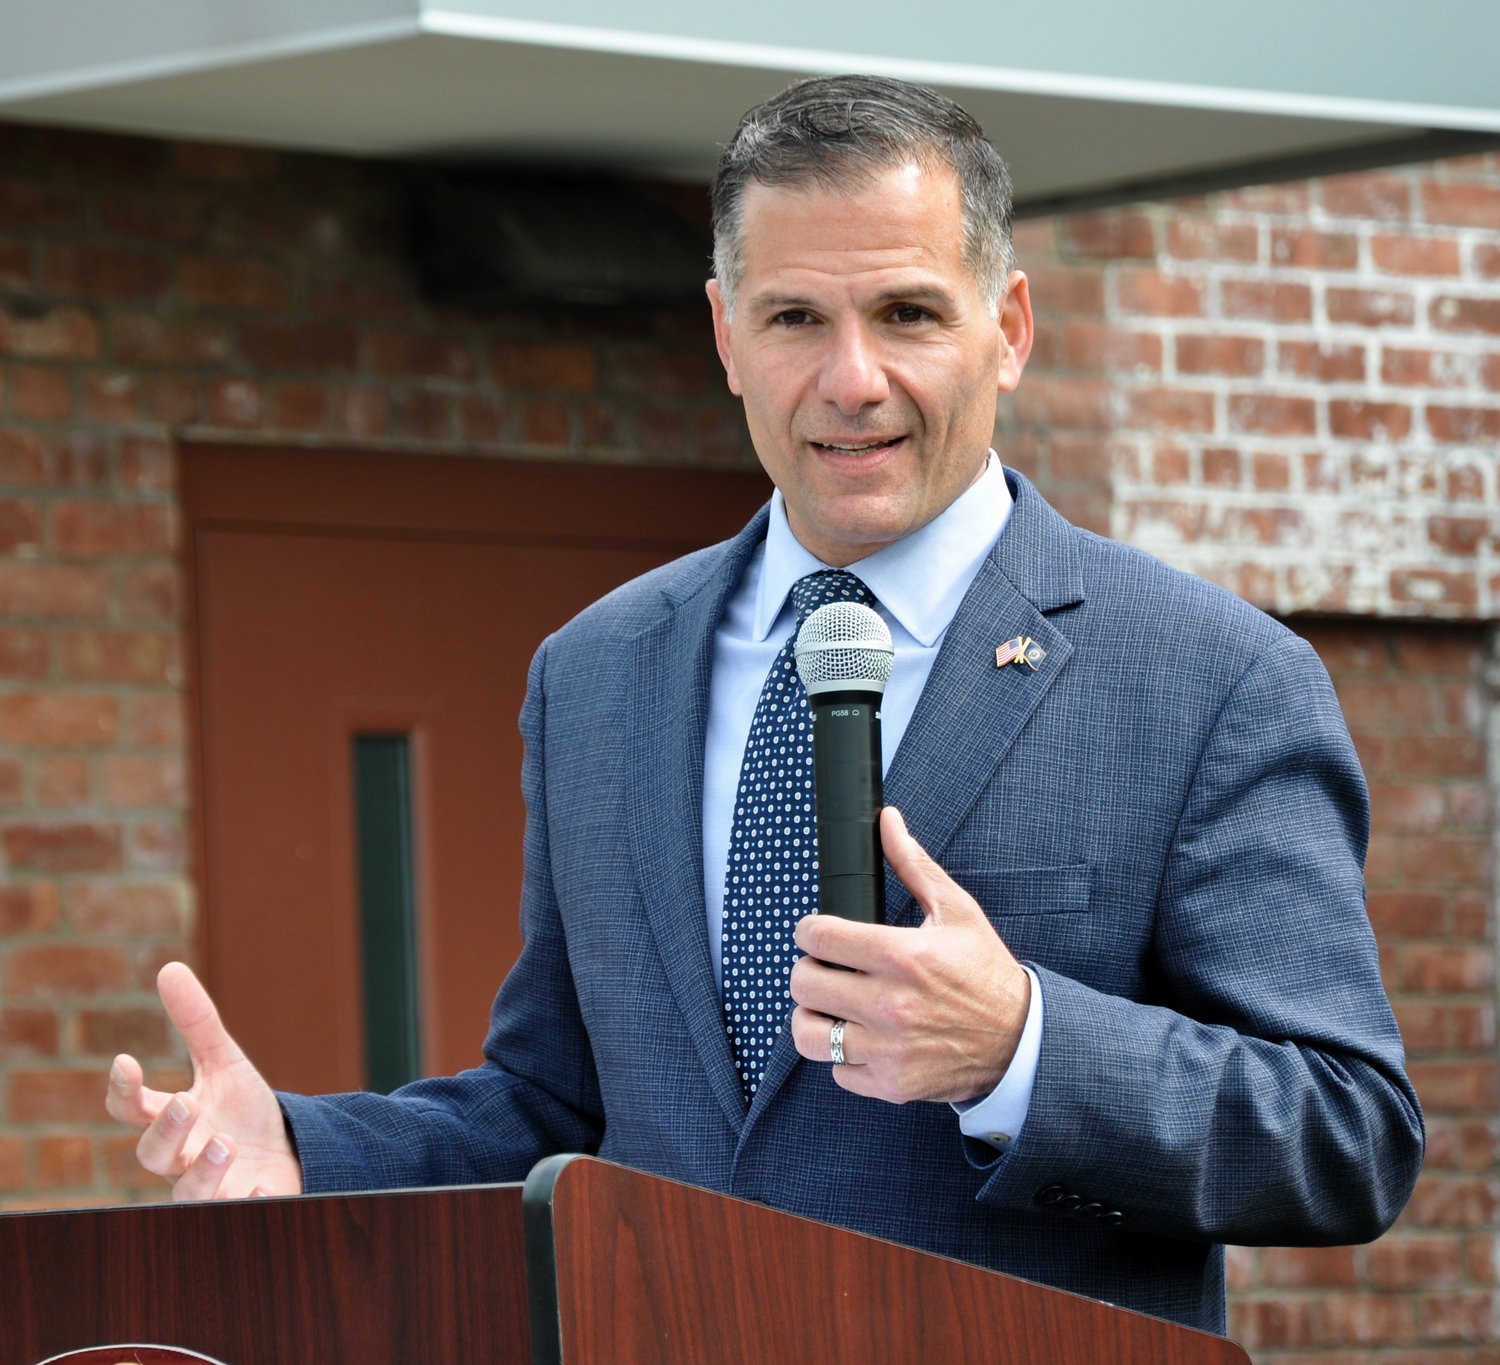 One reader says residents must make Rep. Marc Molinaro a one-term congressman.